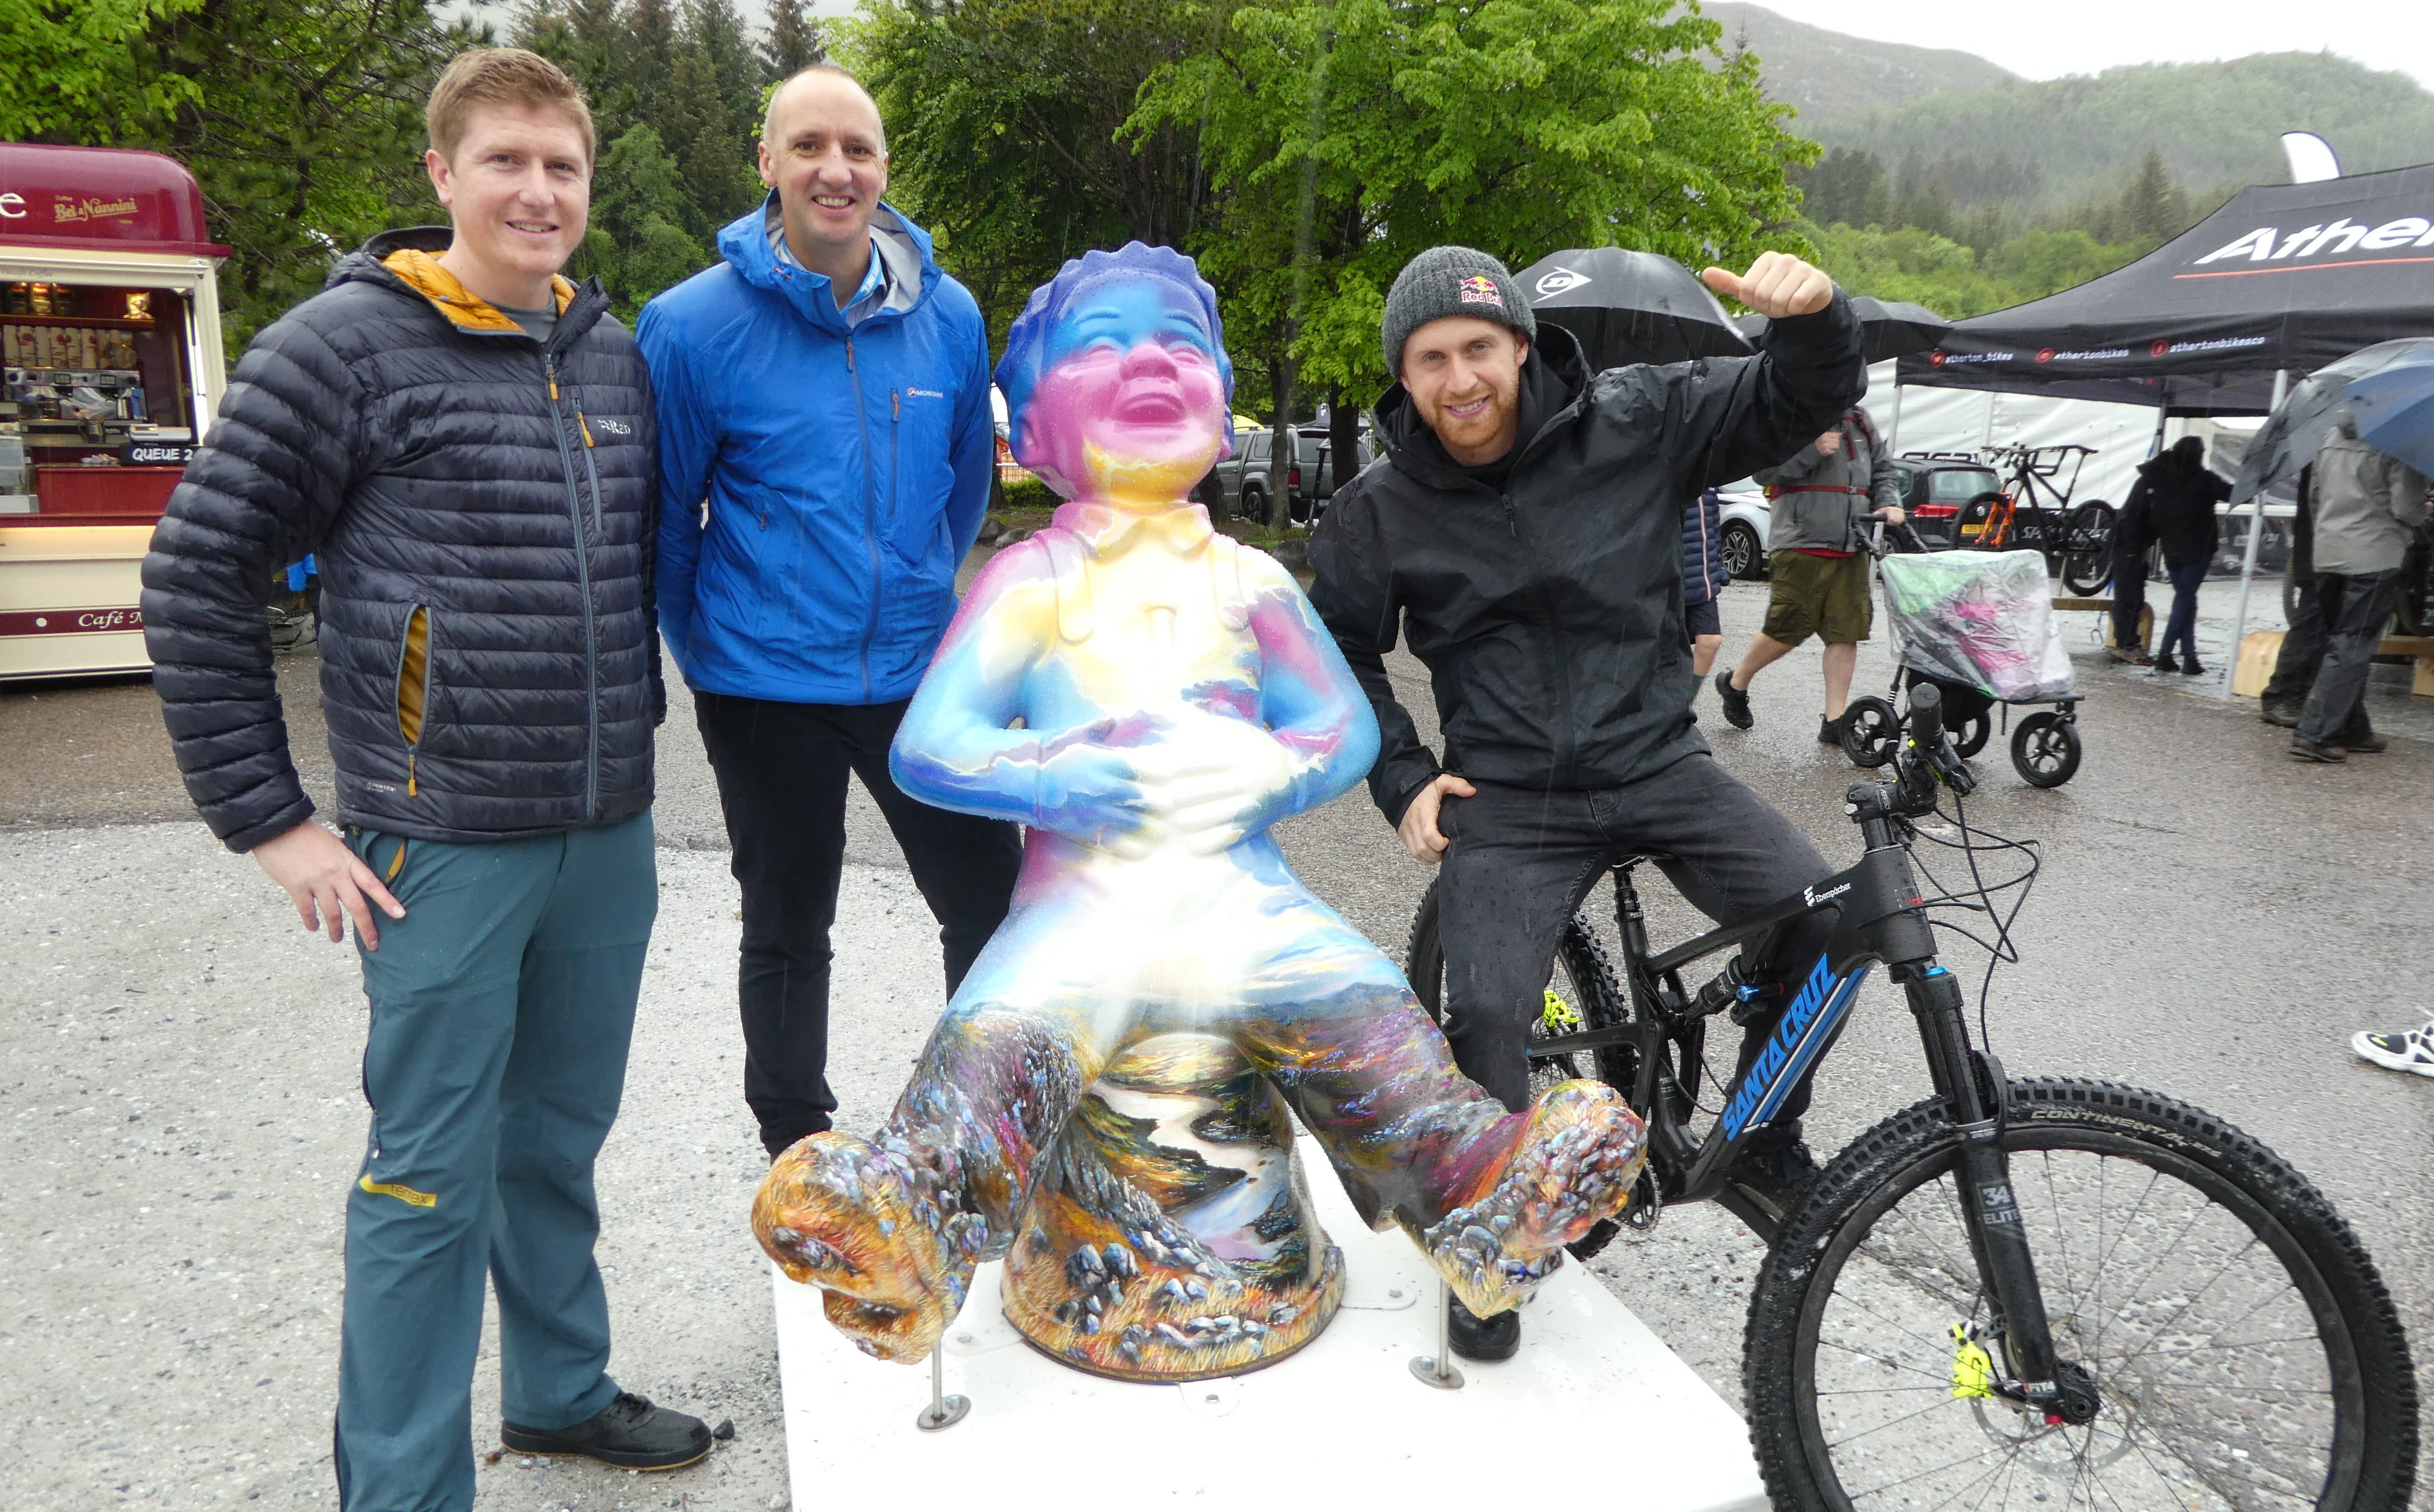 (l-r) Douglas Roulston, VisitScotland Regional Partnerships Director, Chris Taylor and Danny MacAskill with the Oor Nevis sculpture